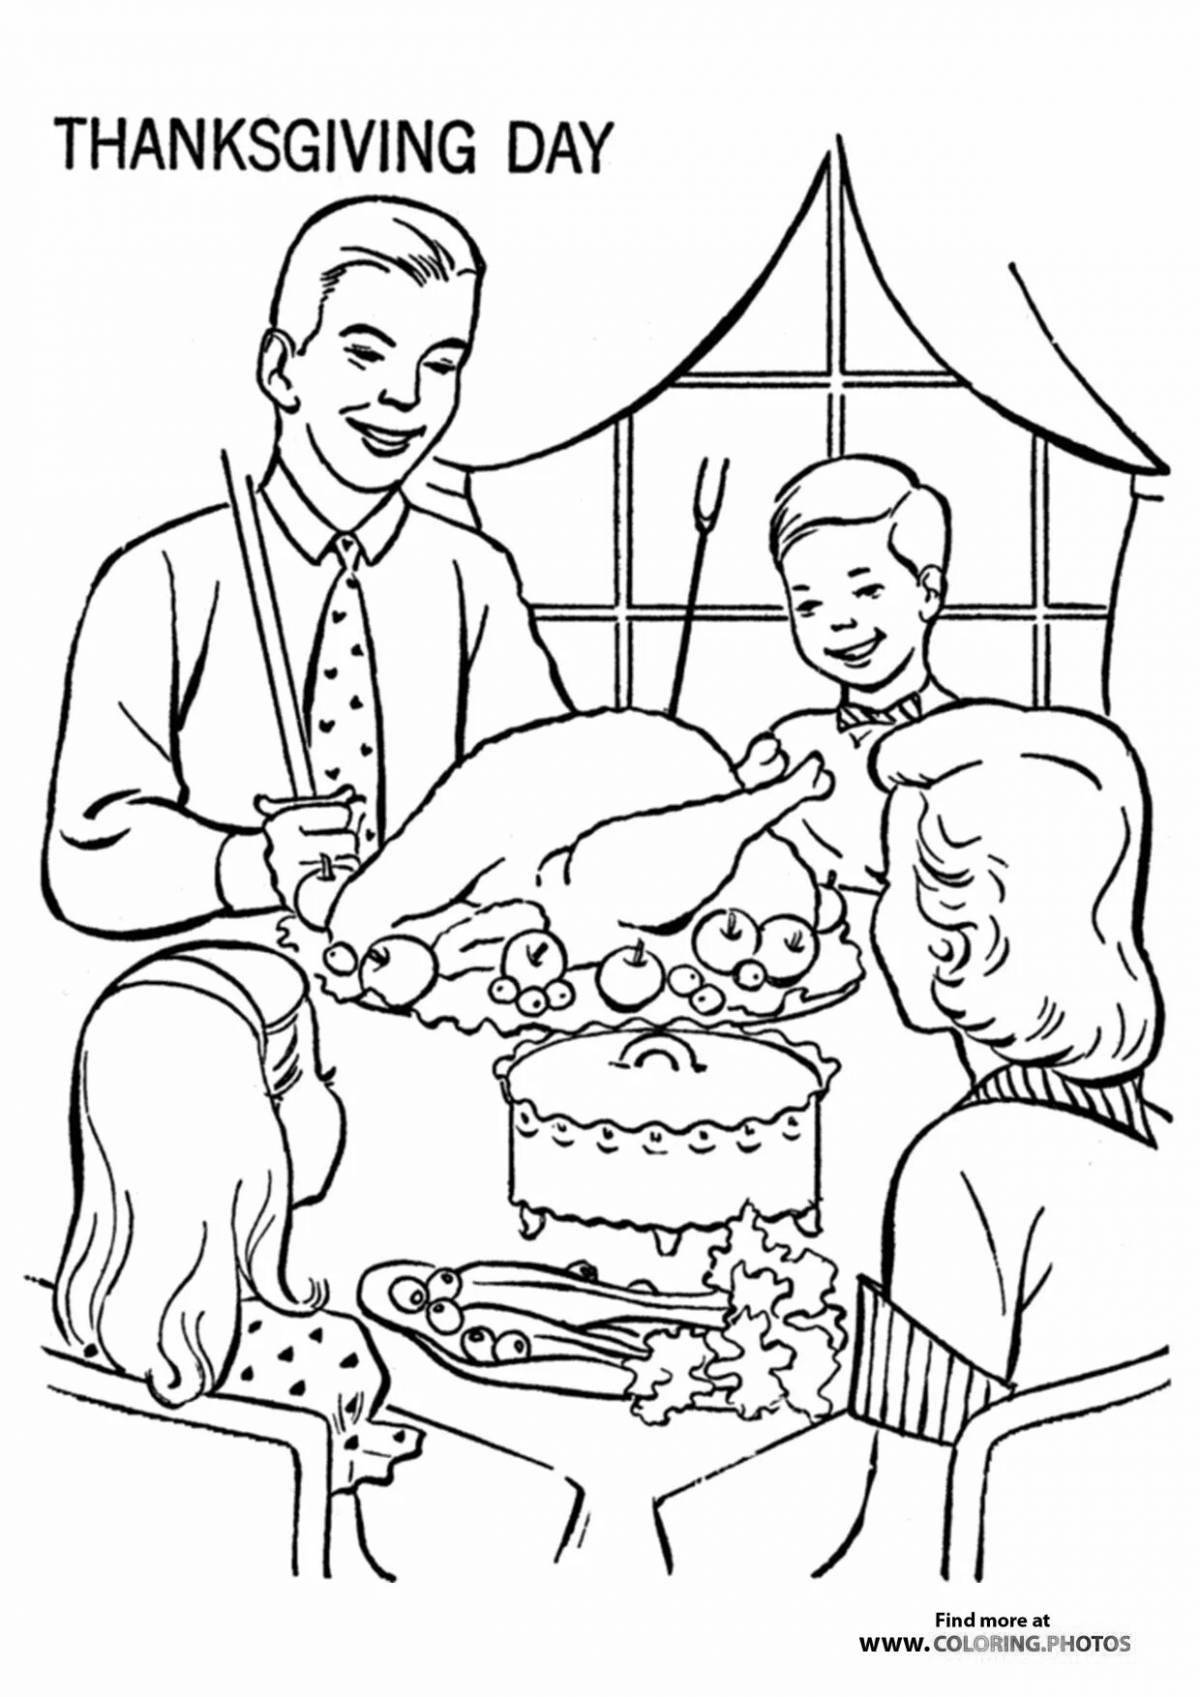 Coloring page loving family at the table